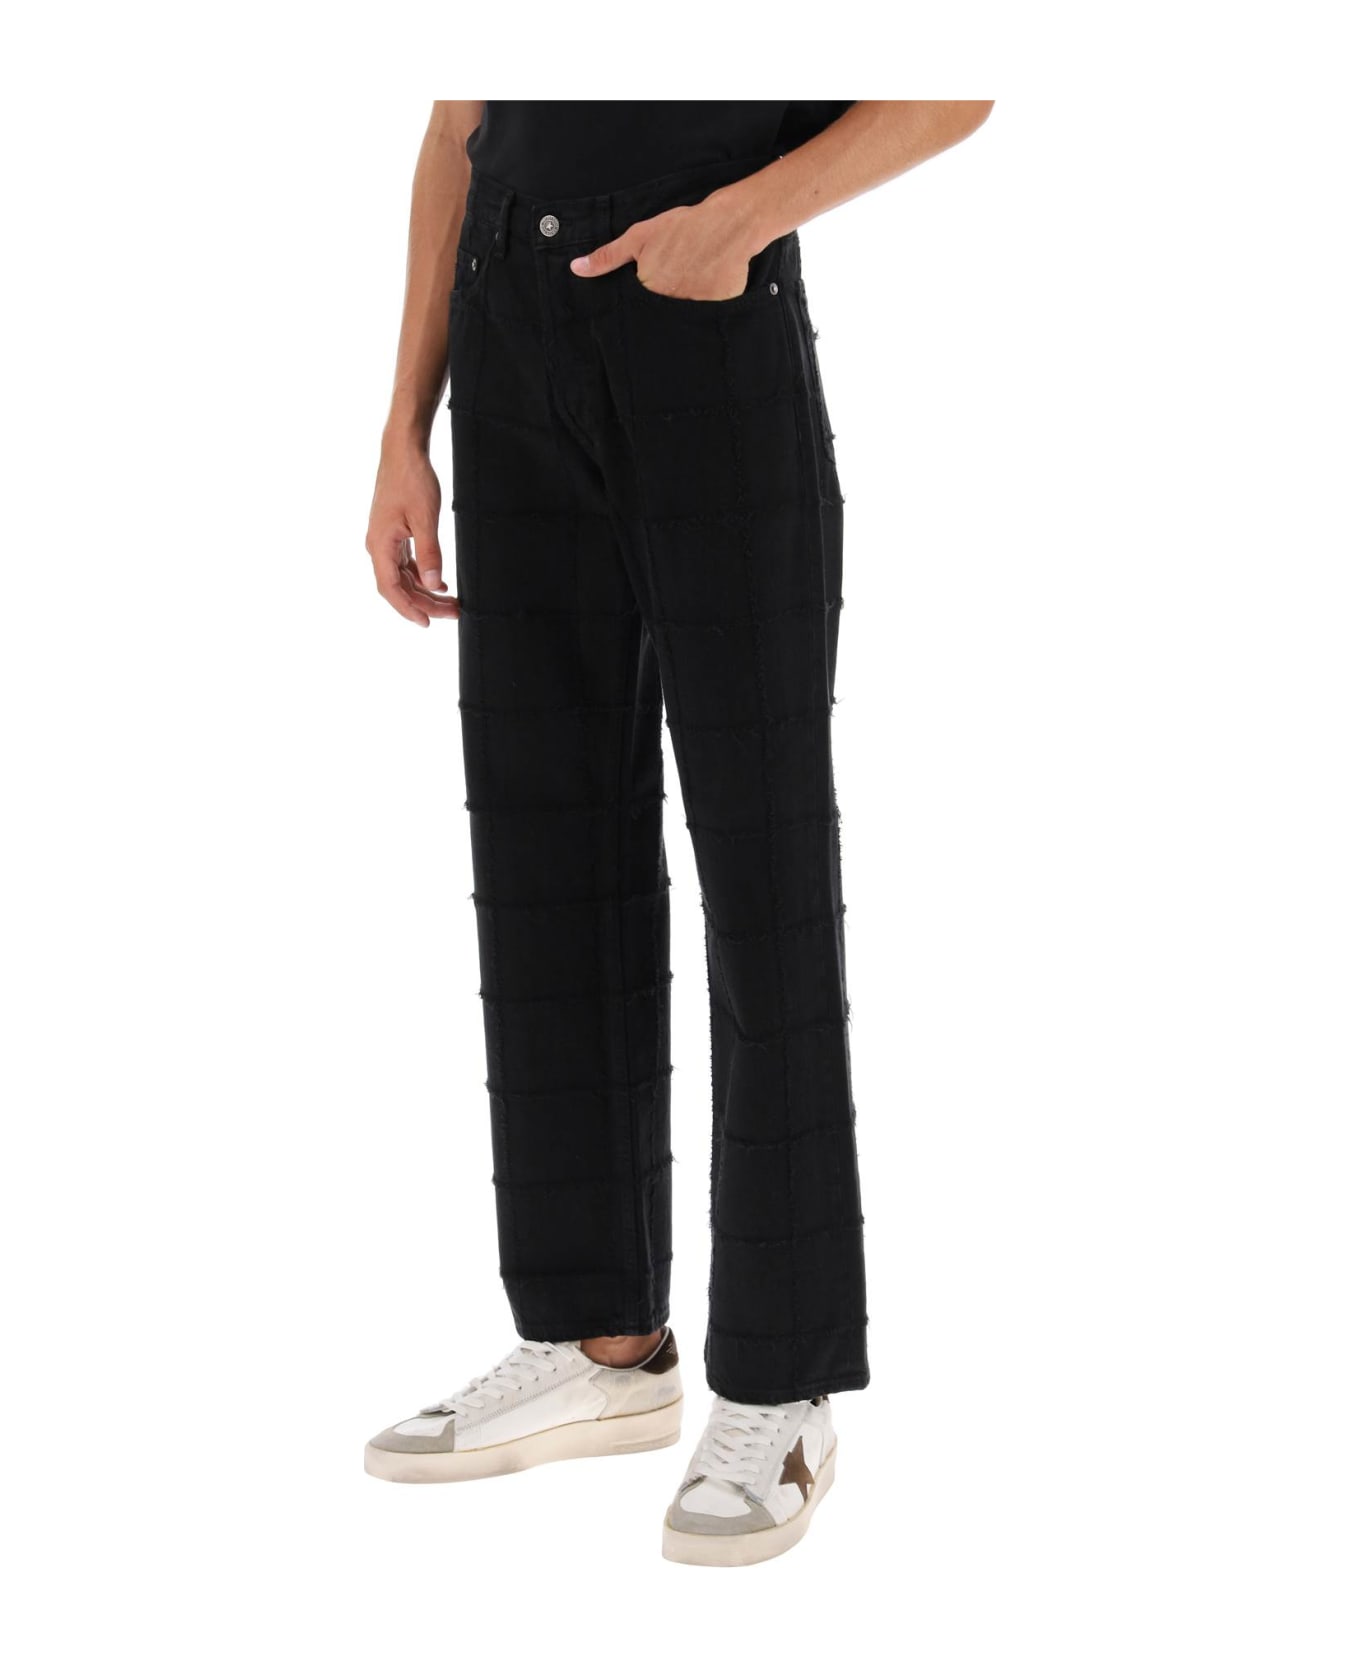 Golden Goose 'skate' Jeans With Check Scratchy Motif - BLACK (Black) ボトムス